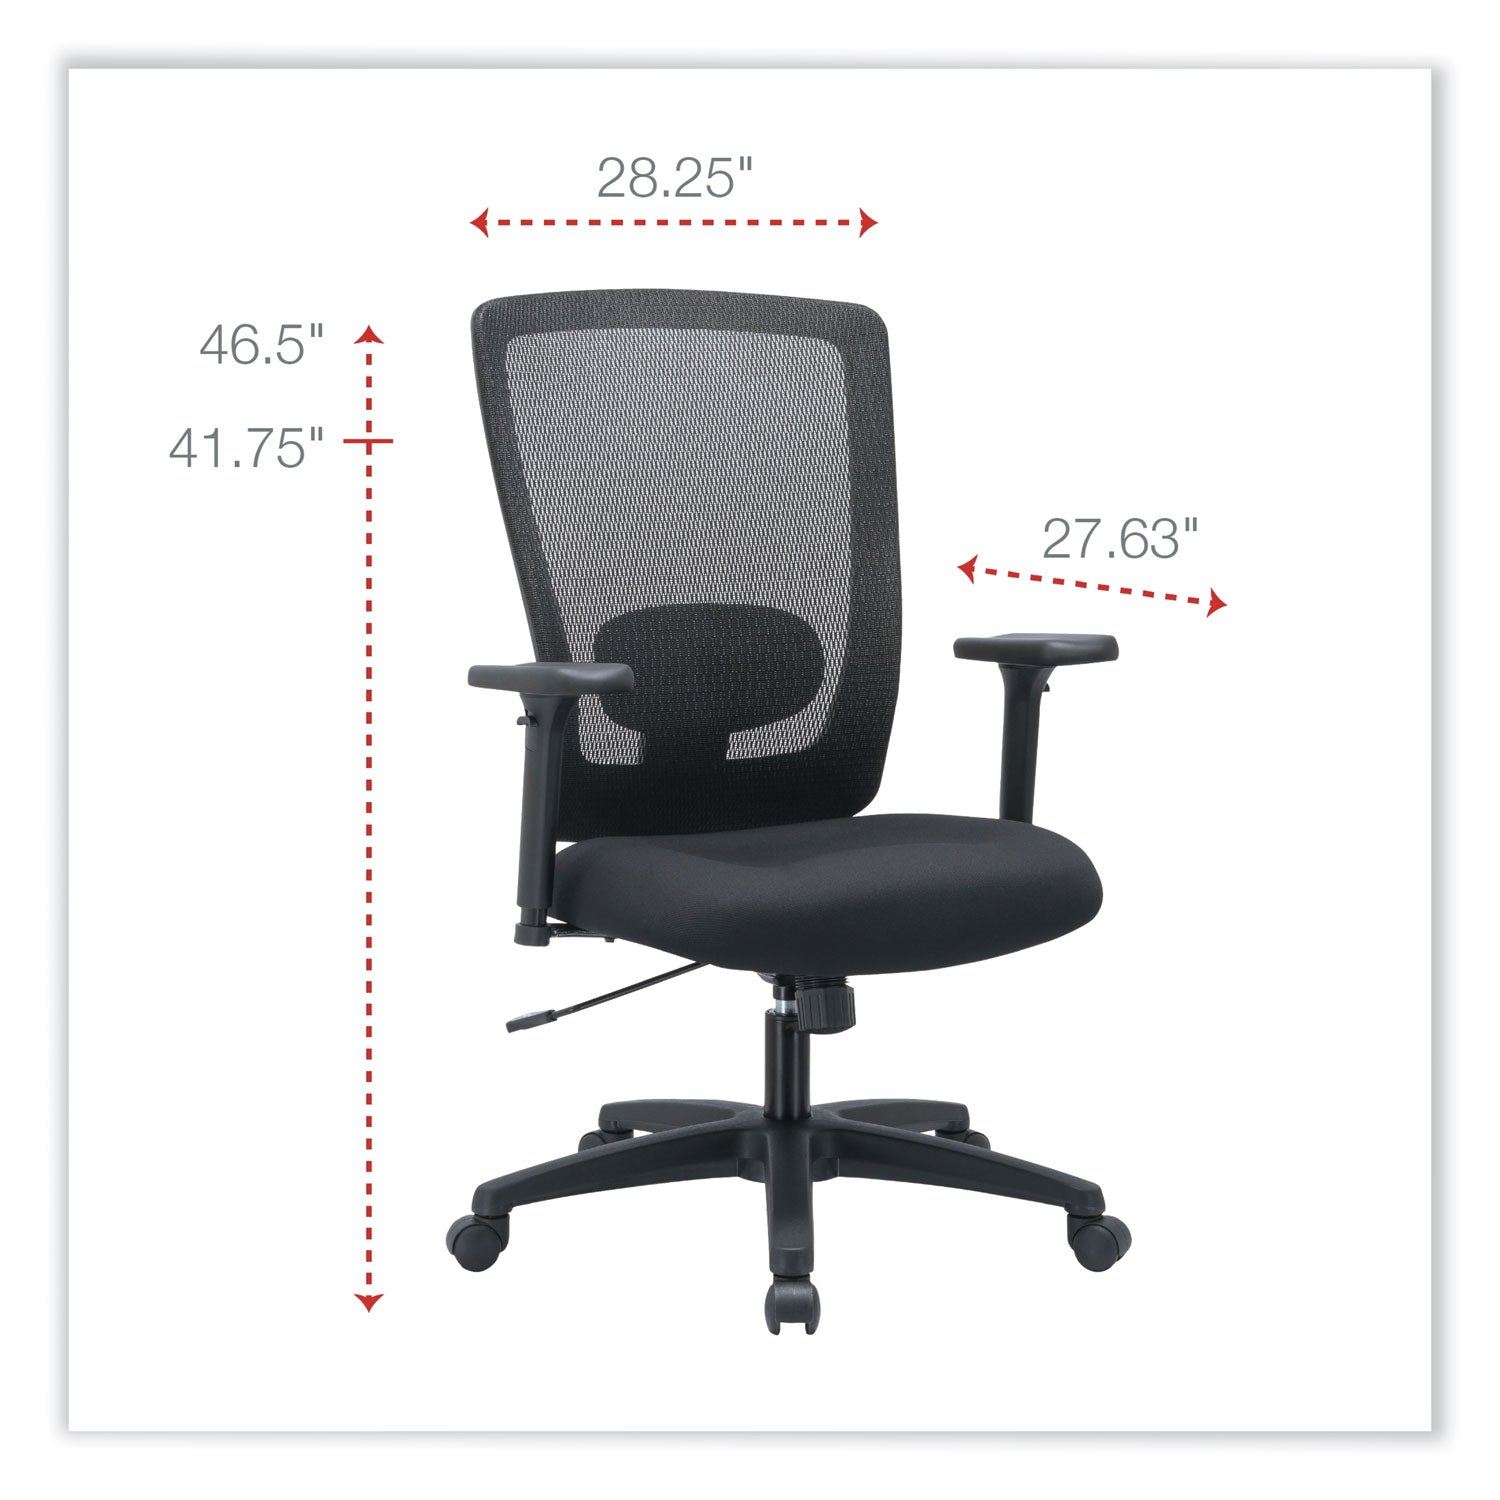 Alera Envy Series Mesh High-Back Multifunction Chair, Supports Up to 250 lb, 16.88" to 21.5" Seat Height, Black - 